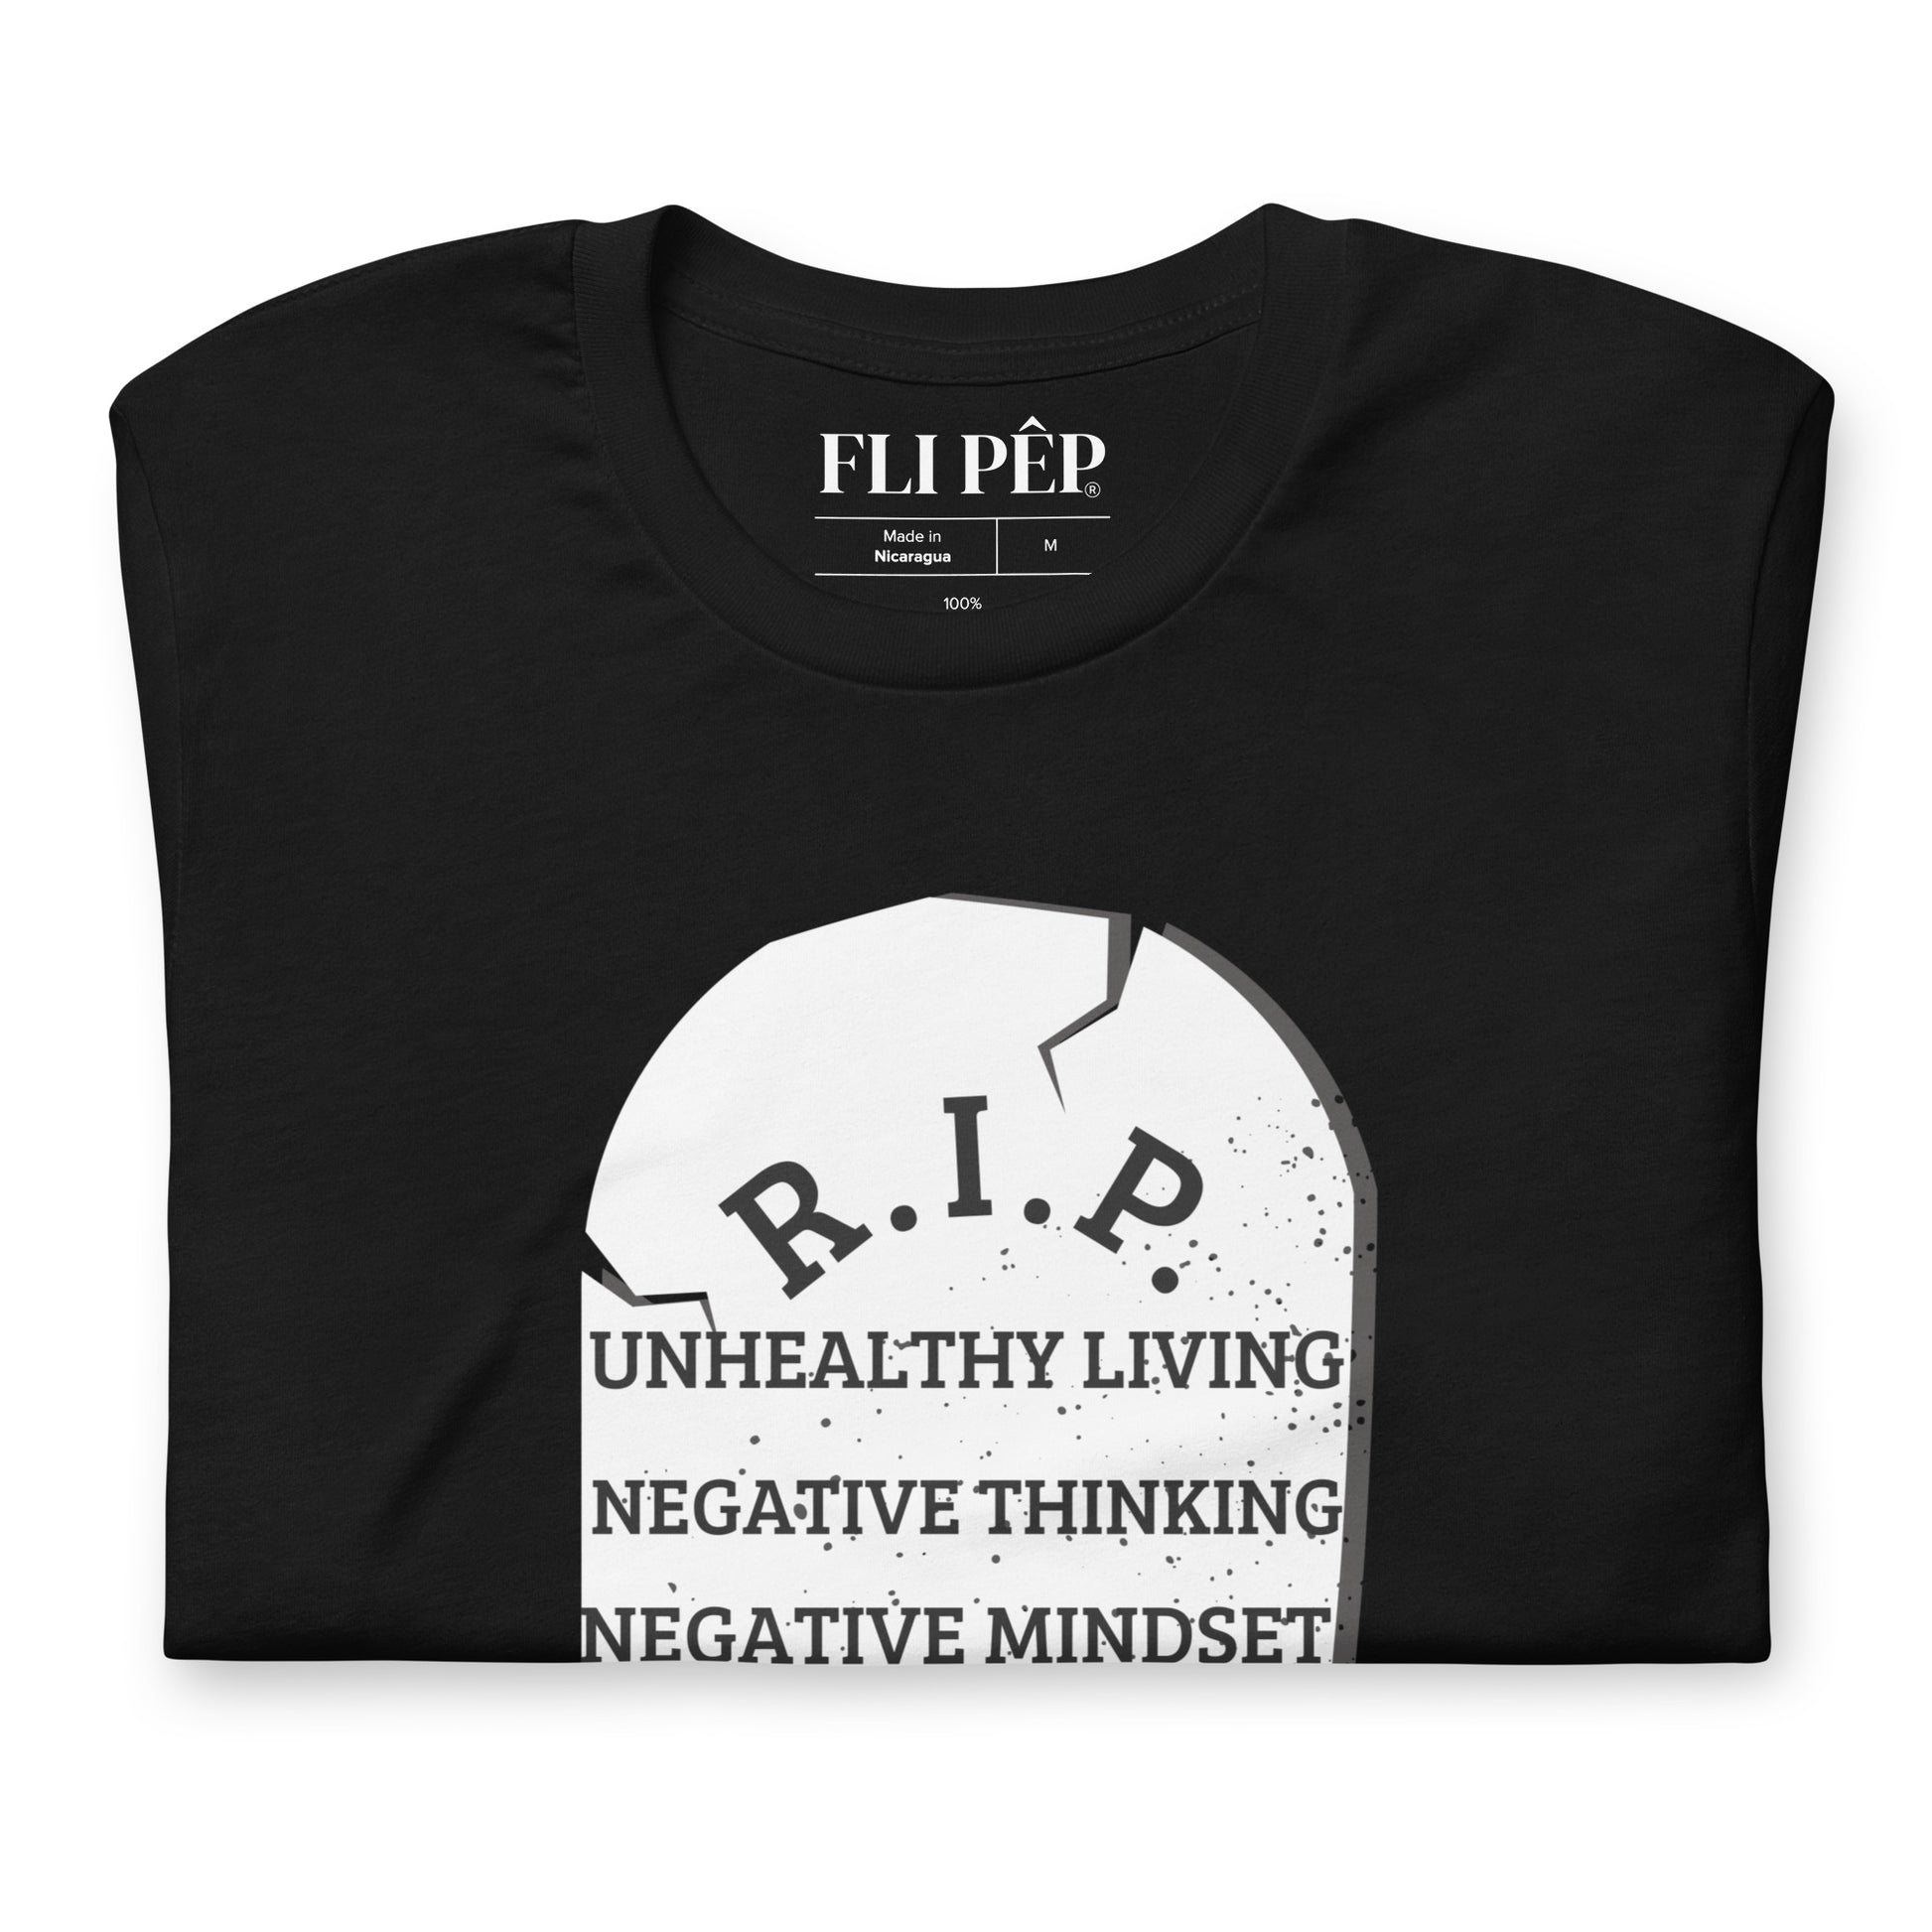  Shop for T-Shirt with Motivational Taglines that Inspire Positive Thinking and Self Belief. Our FLI PÊP! store features Organic Eco-Friendly tees and t-shirts to motivate you to be your best self. Our T-Shirts are made to fit just right and eliminate negative thinking.